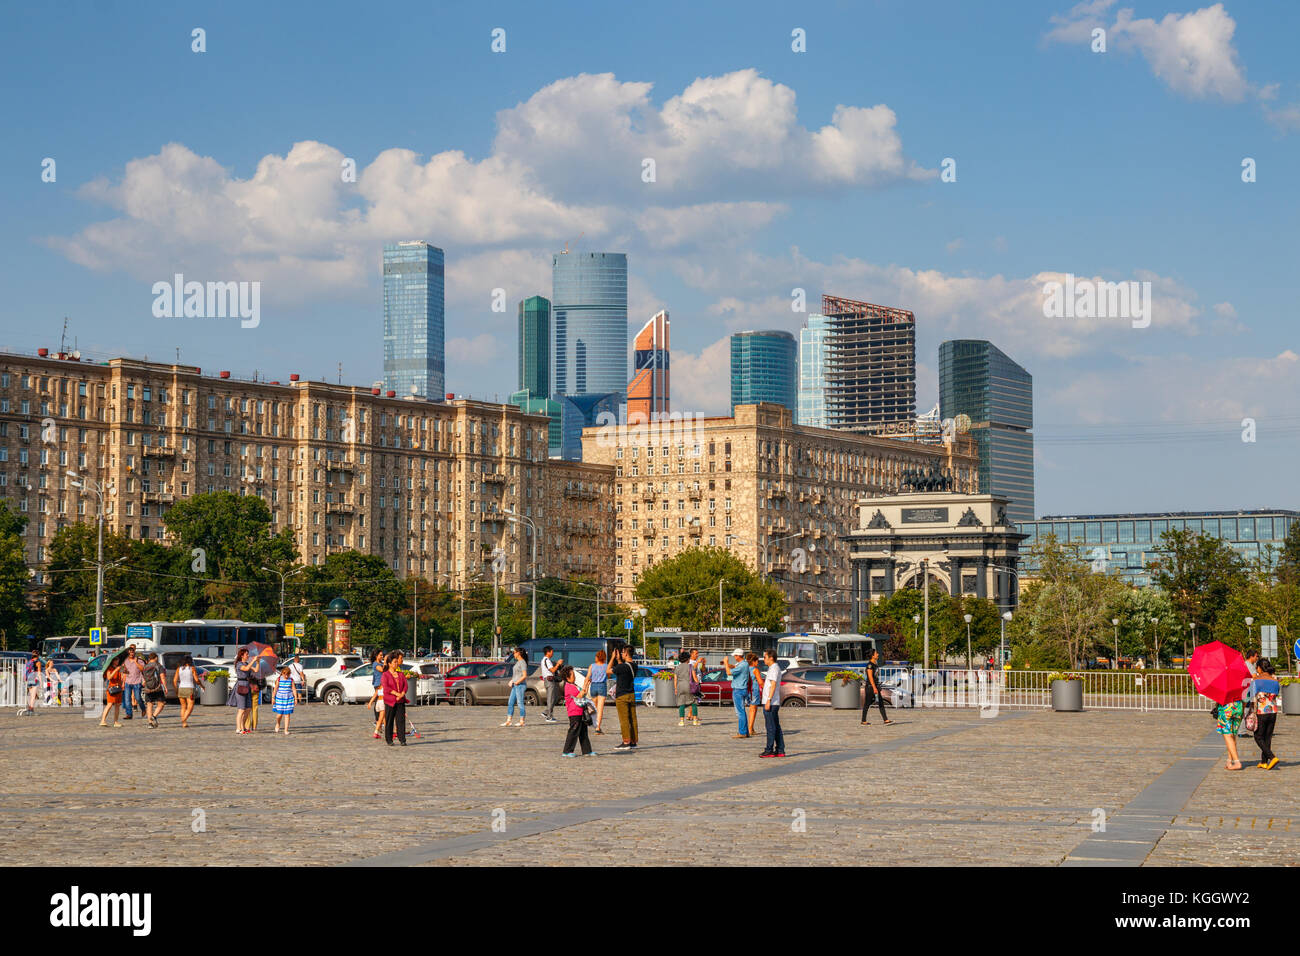 Poklonnaya Hill, Kutuzovsky Prospekt with residential buildings and the Moscow International Business Center (MIBC) at the background. Russia. Stock Photo